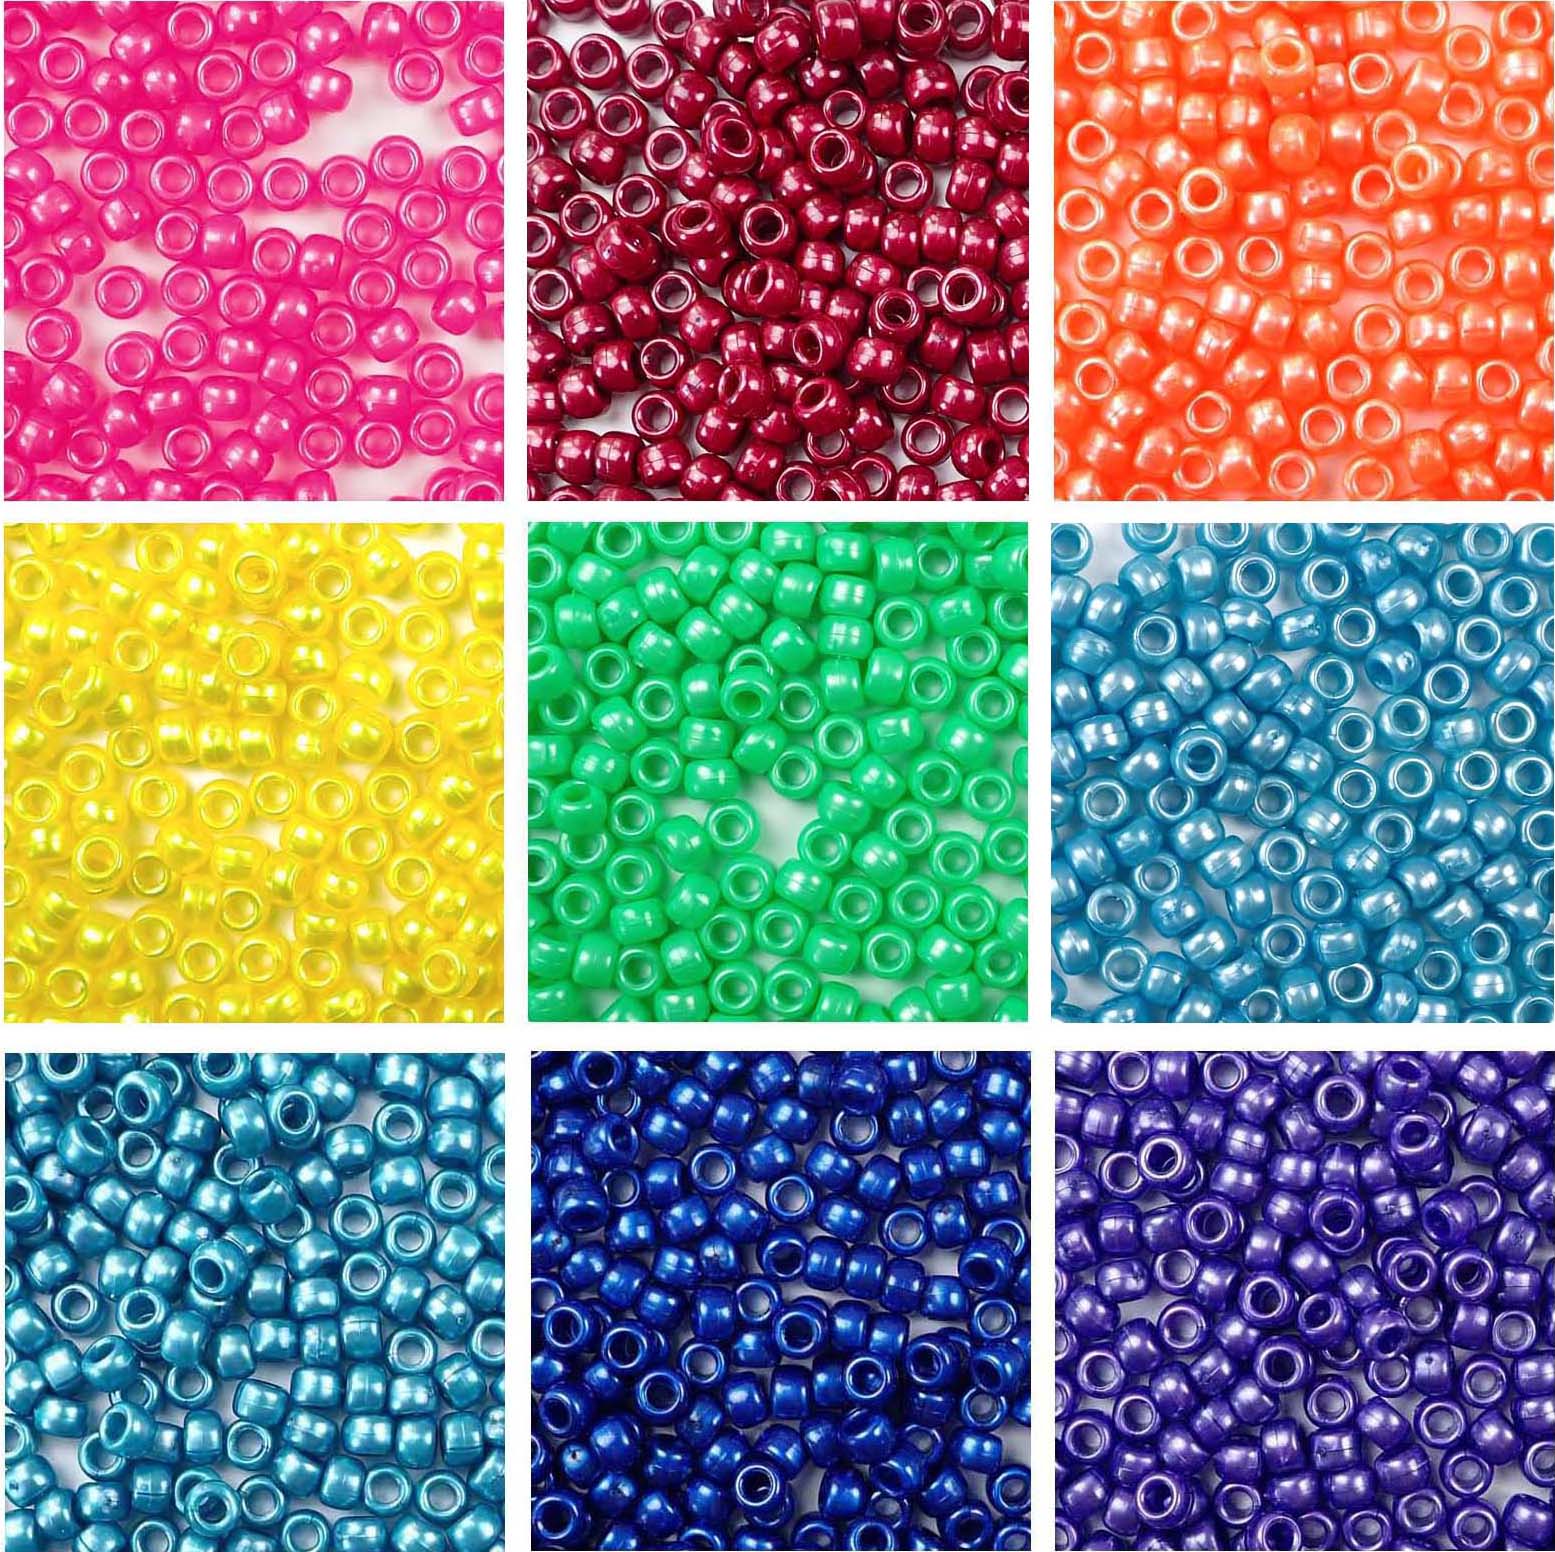 Rainbow Pearl 6 x 9mm Pony Bead Variety Pack - 9 Colors (4500 beads total)